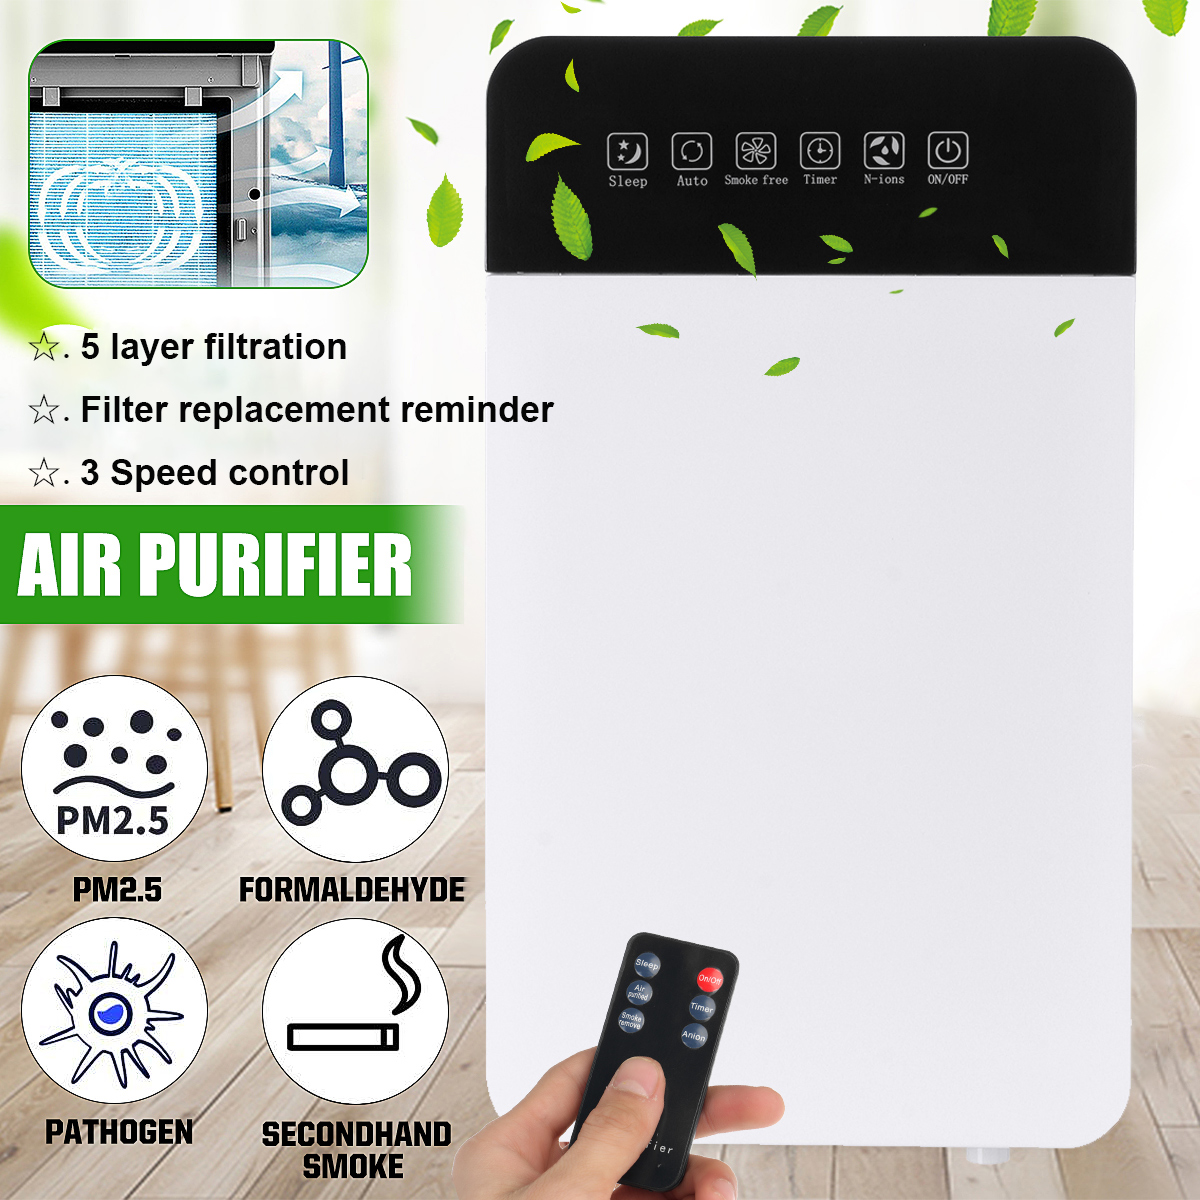 Air-Purifier-Negative-Ions-Air-Cleaner-Remove-Formaldehyde-PM25-W-HEPA-Filter-1628421-1